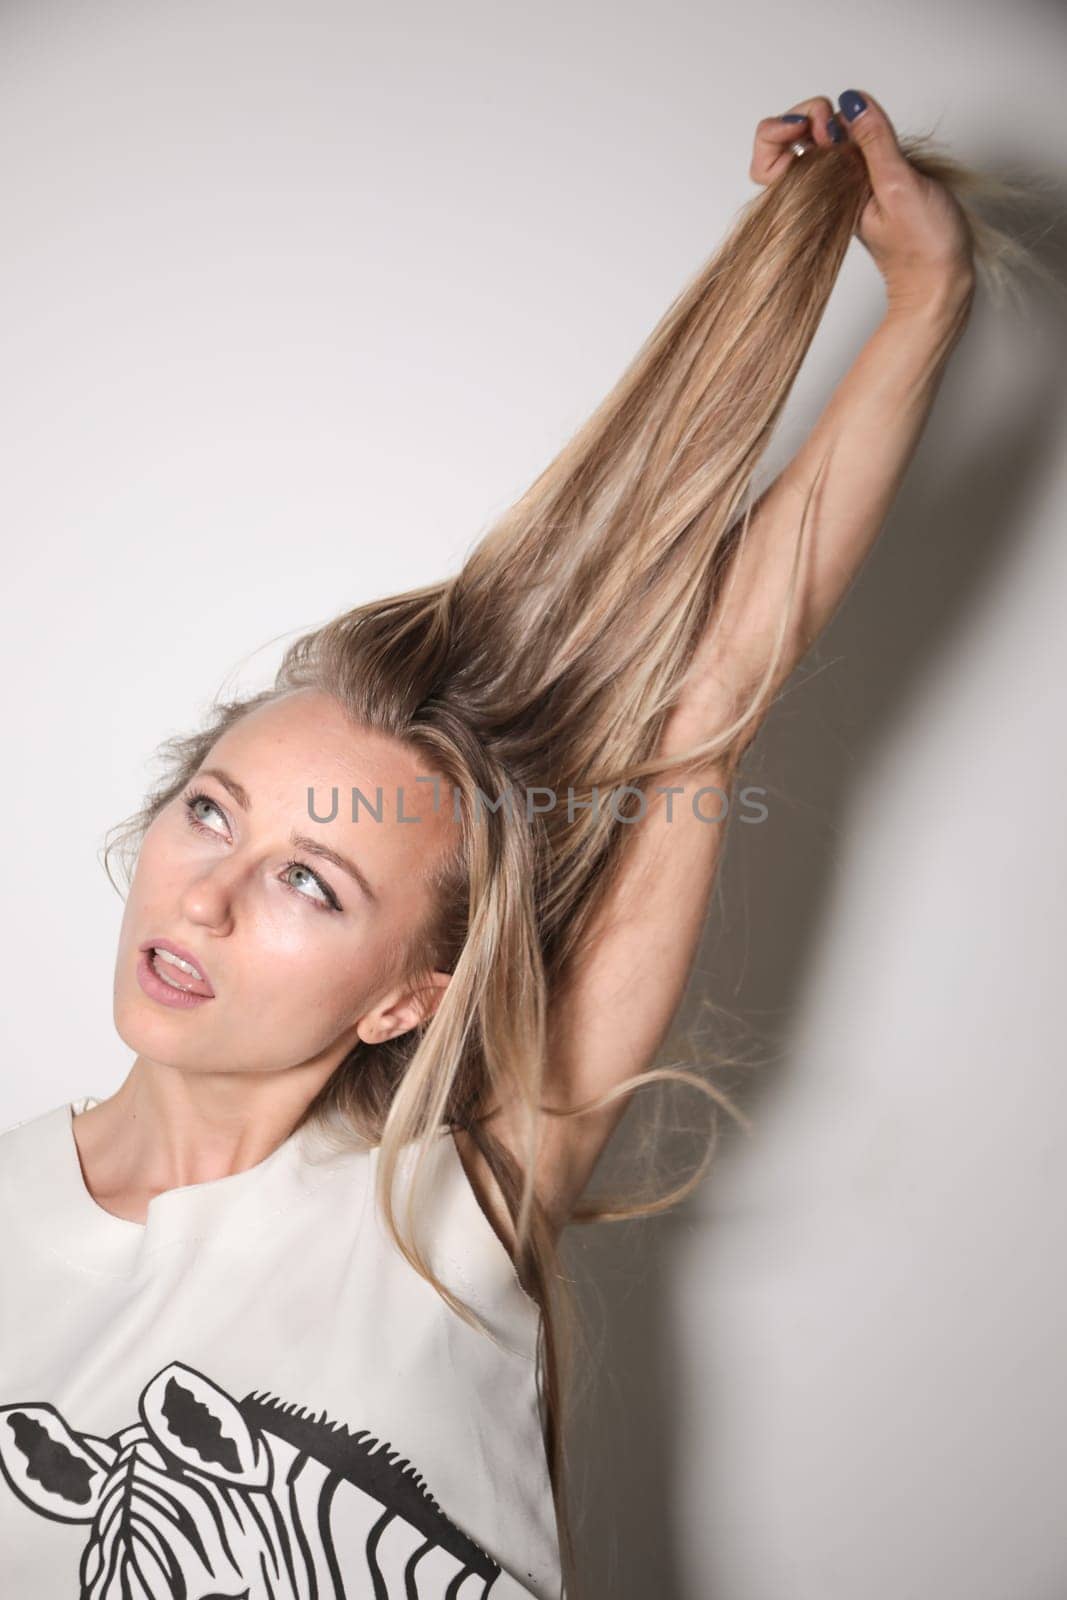 A young model, blonde, dressed in a T-shirt with trimmed sleeves, placed in front of a white wall and illuminated by a strong flash light, stretches her hair with one hand.